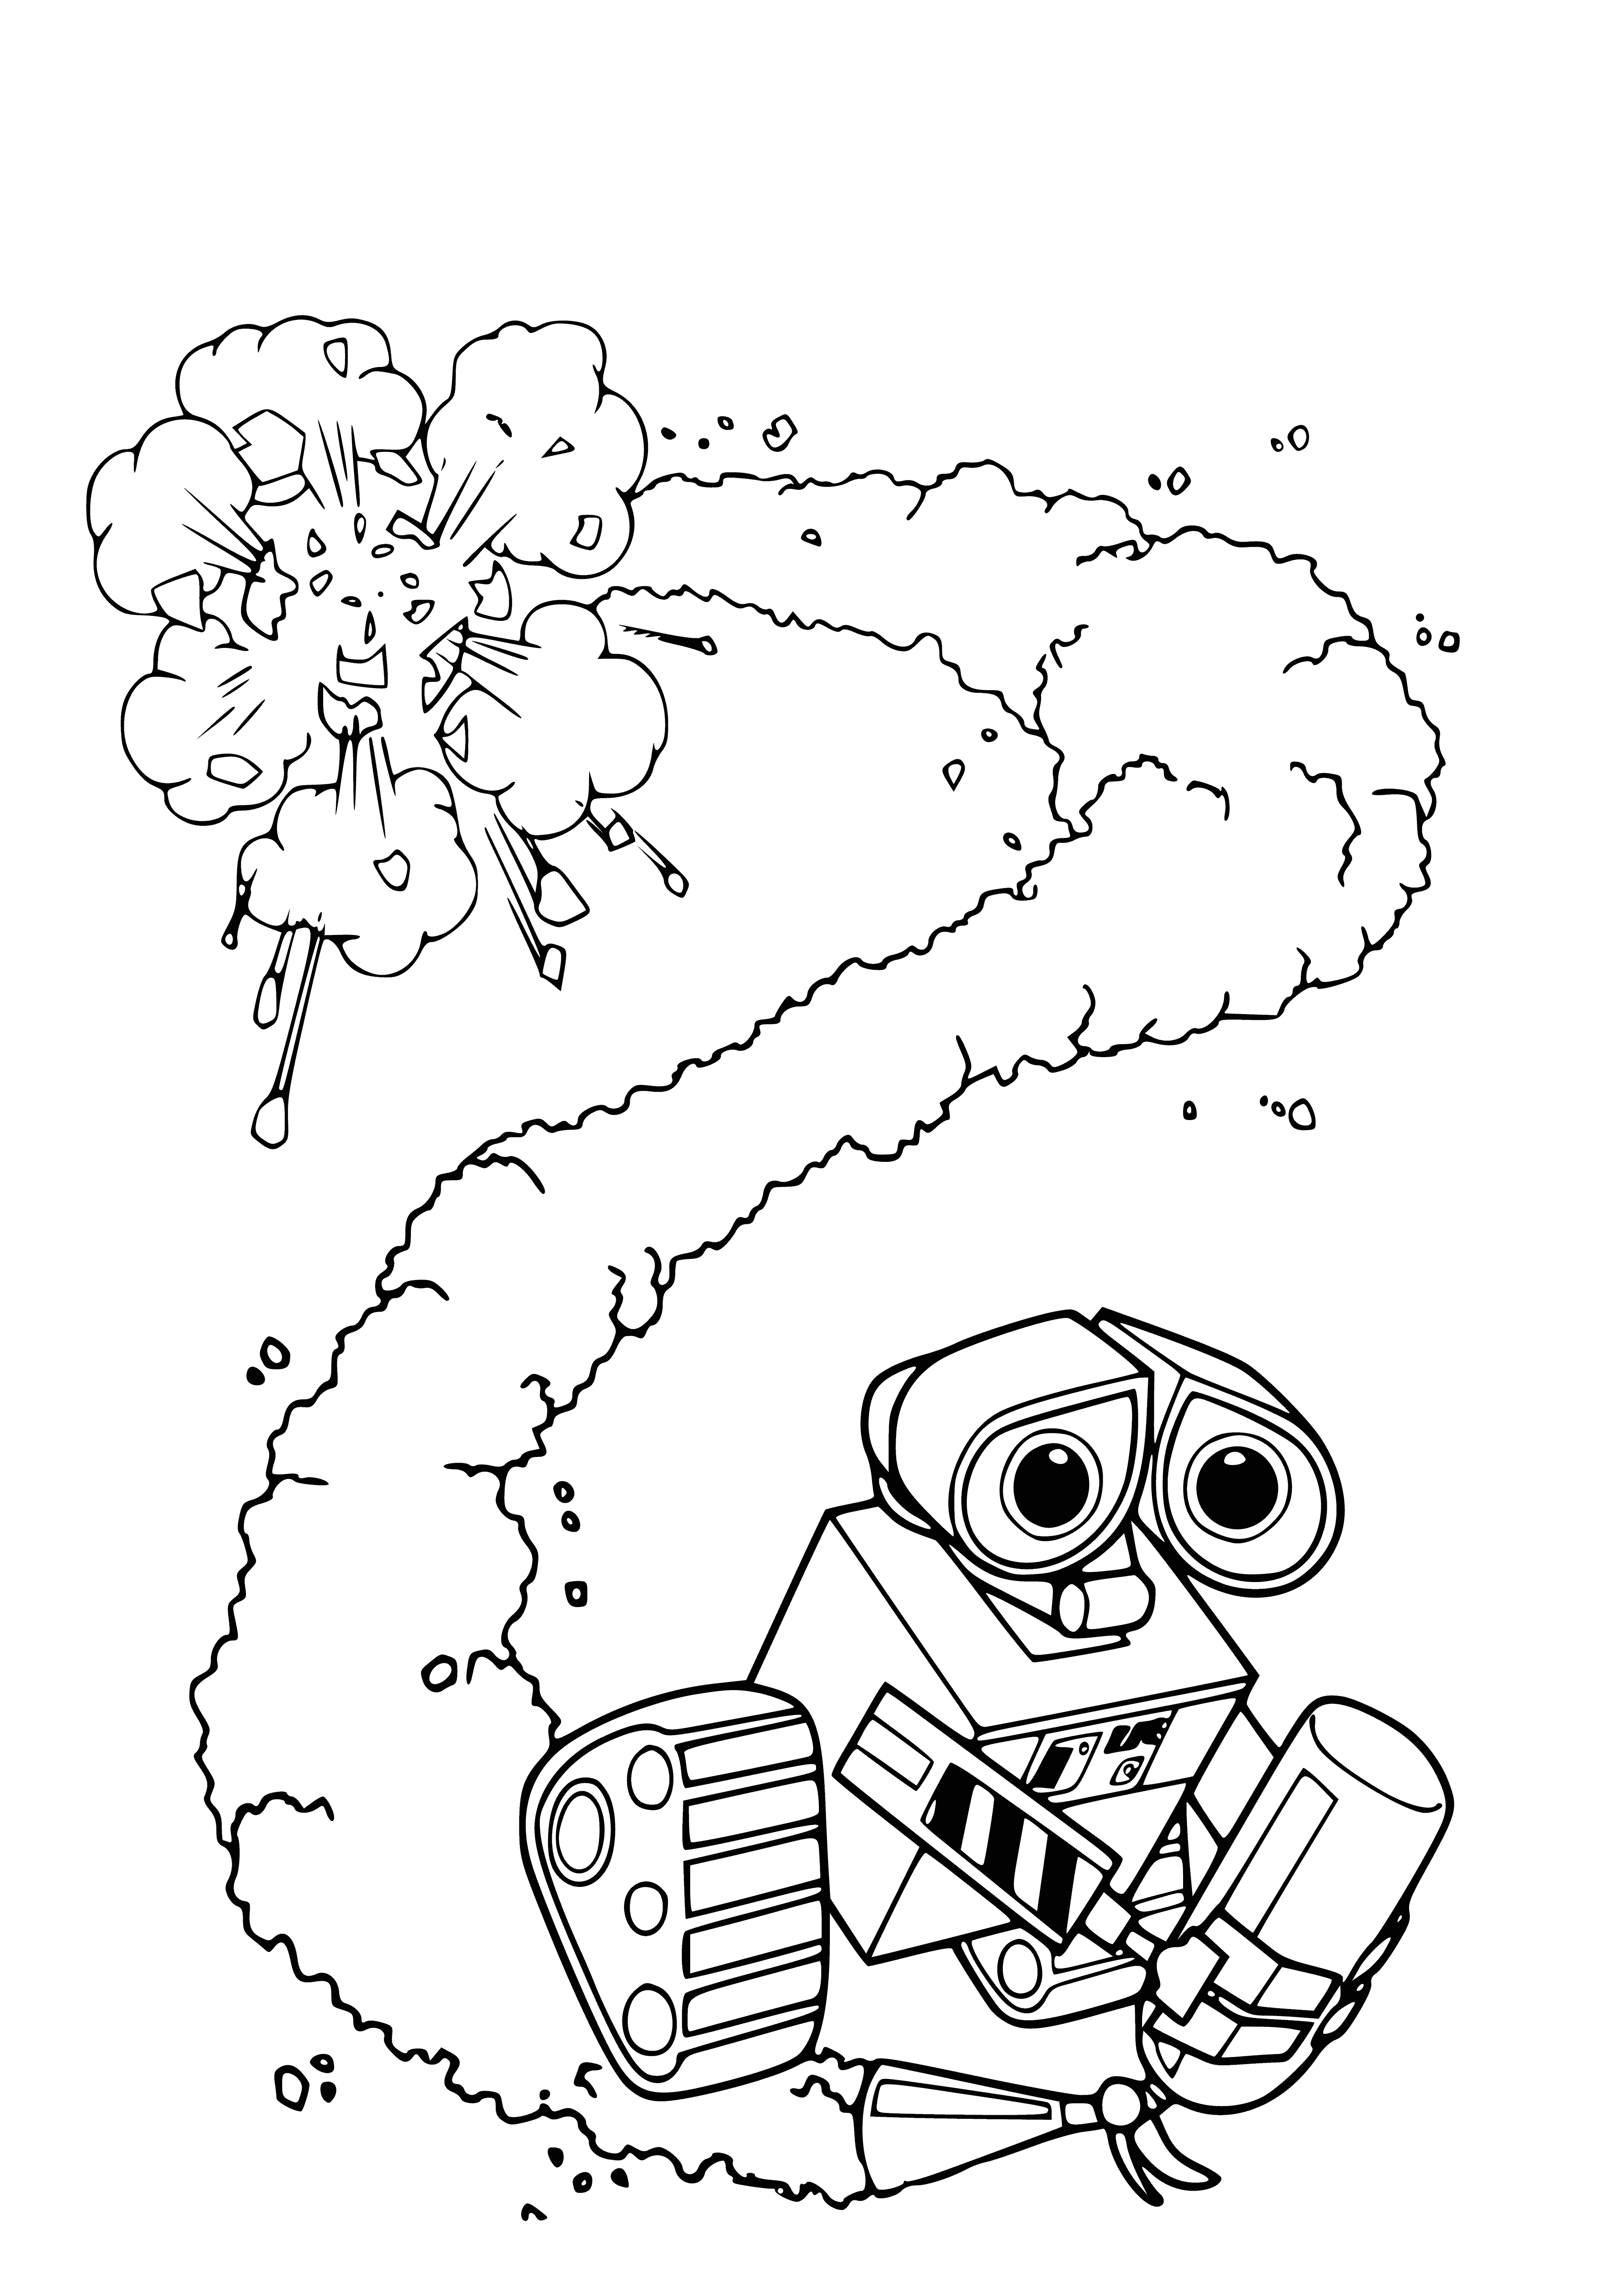 Valley and fire extinguisher coloring page